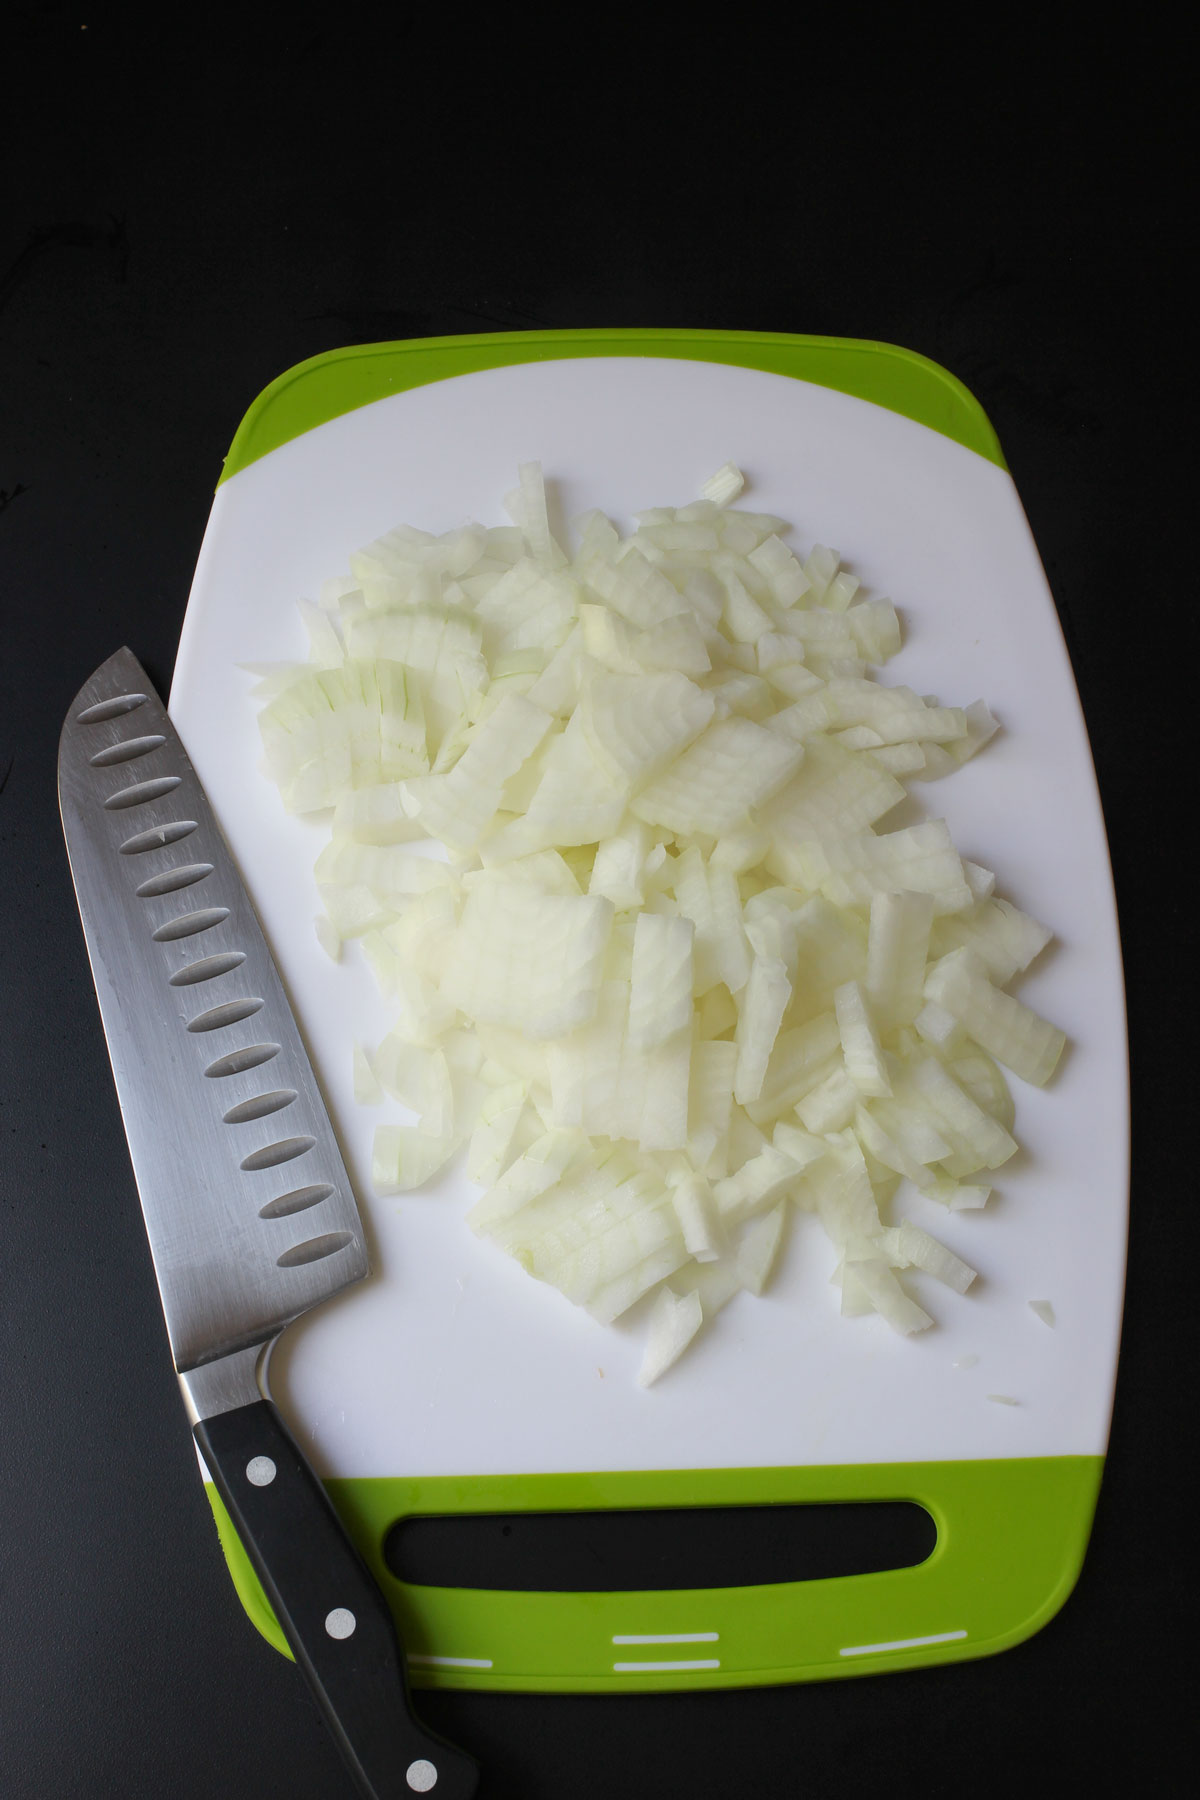 chopped onions on cutting board next to knife.